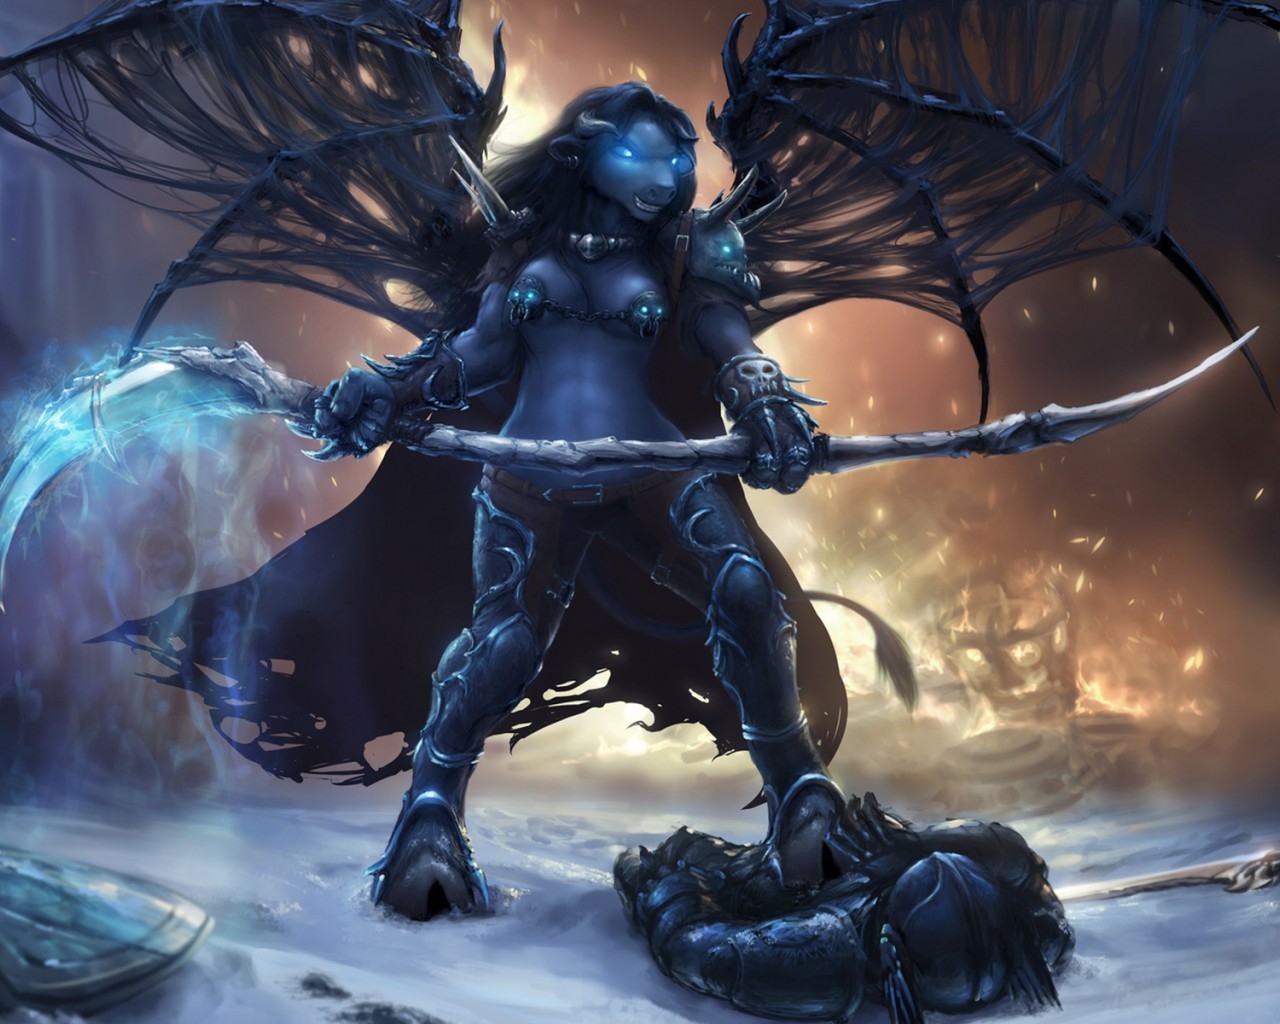 Death Knight World of Warcraft for 1280 x 1024 resolution